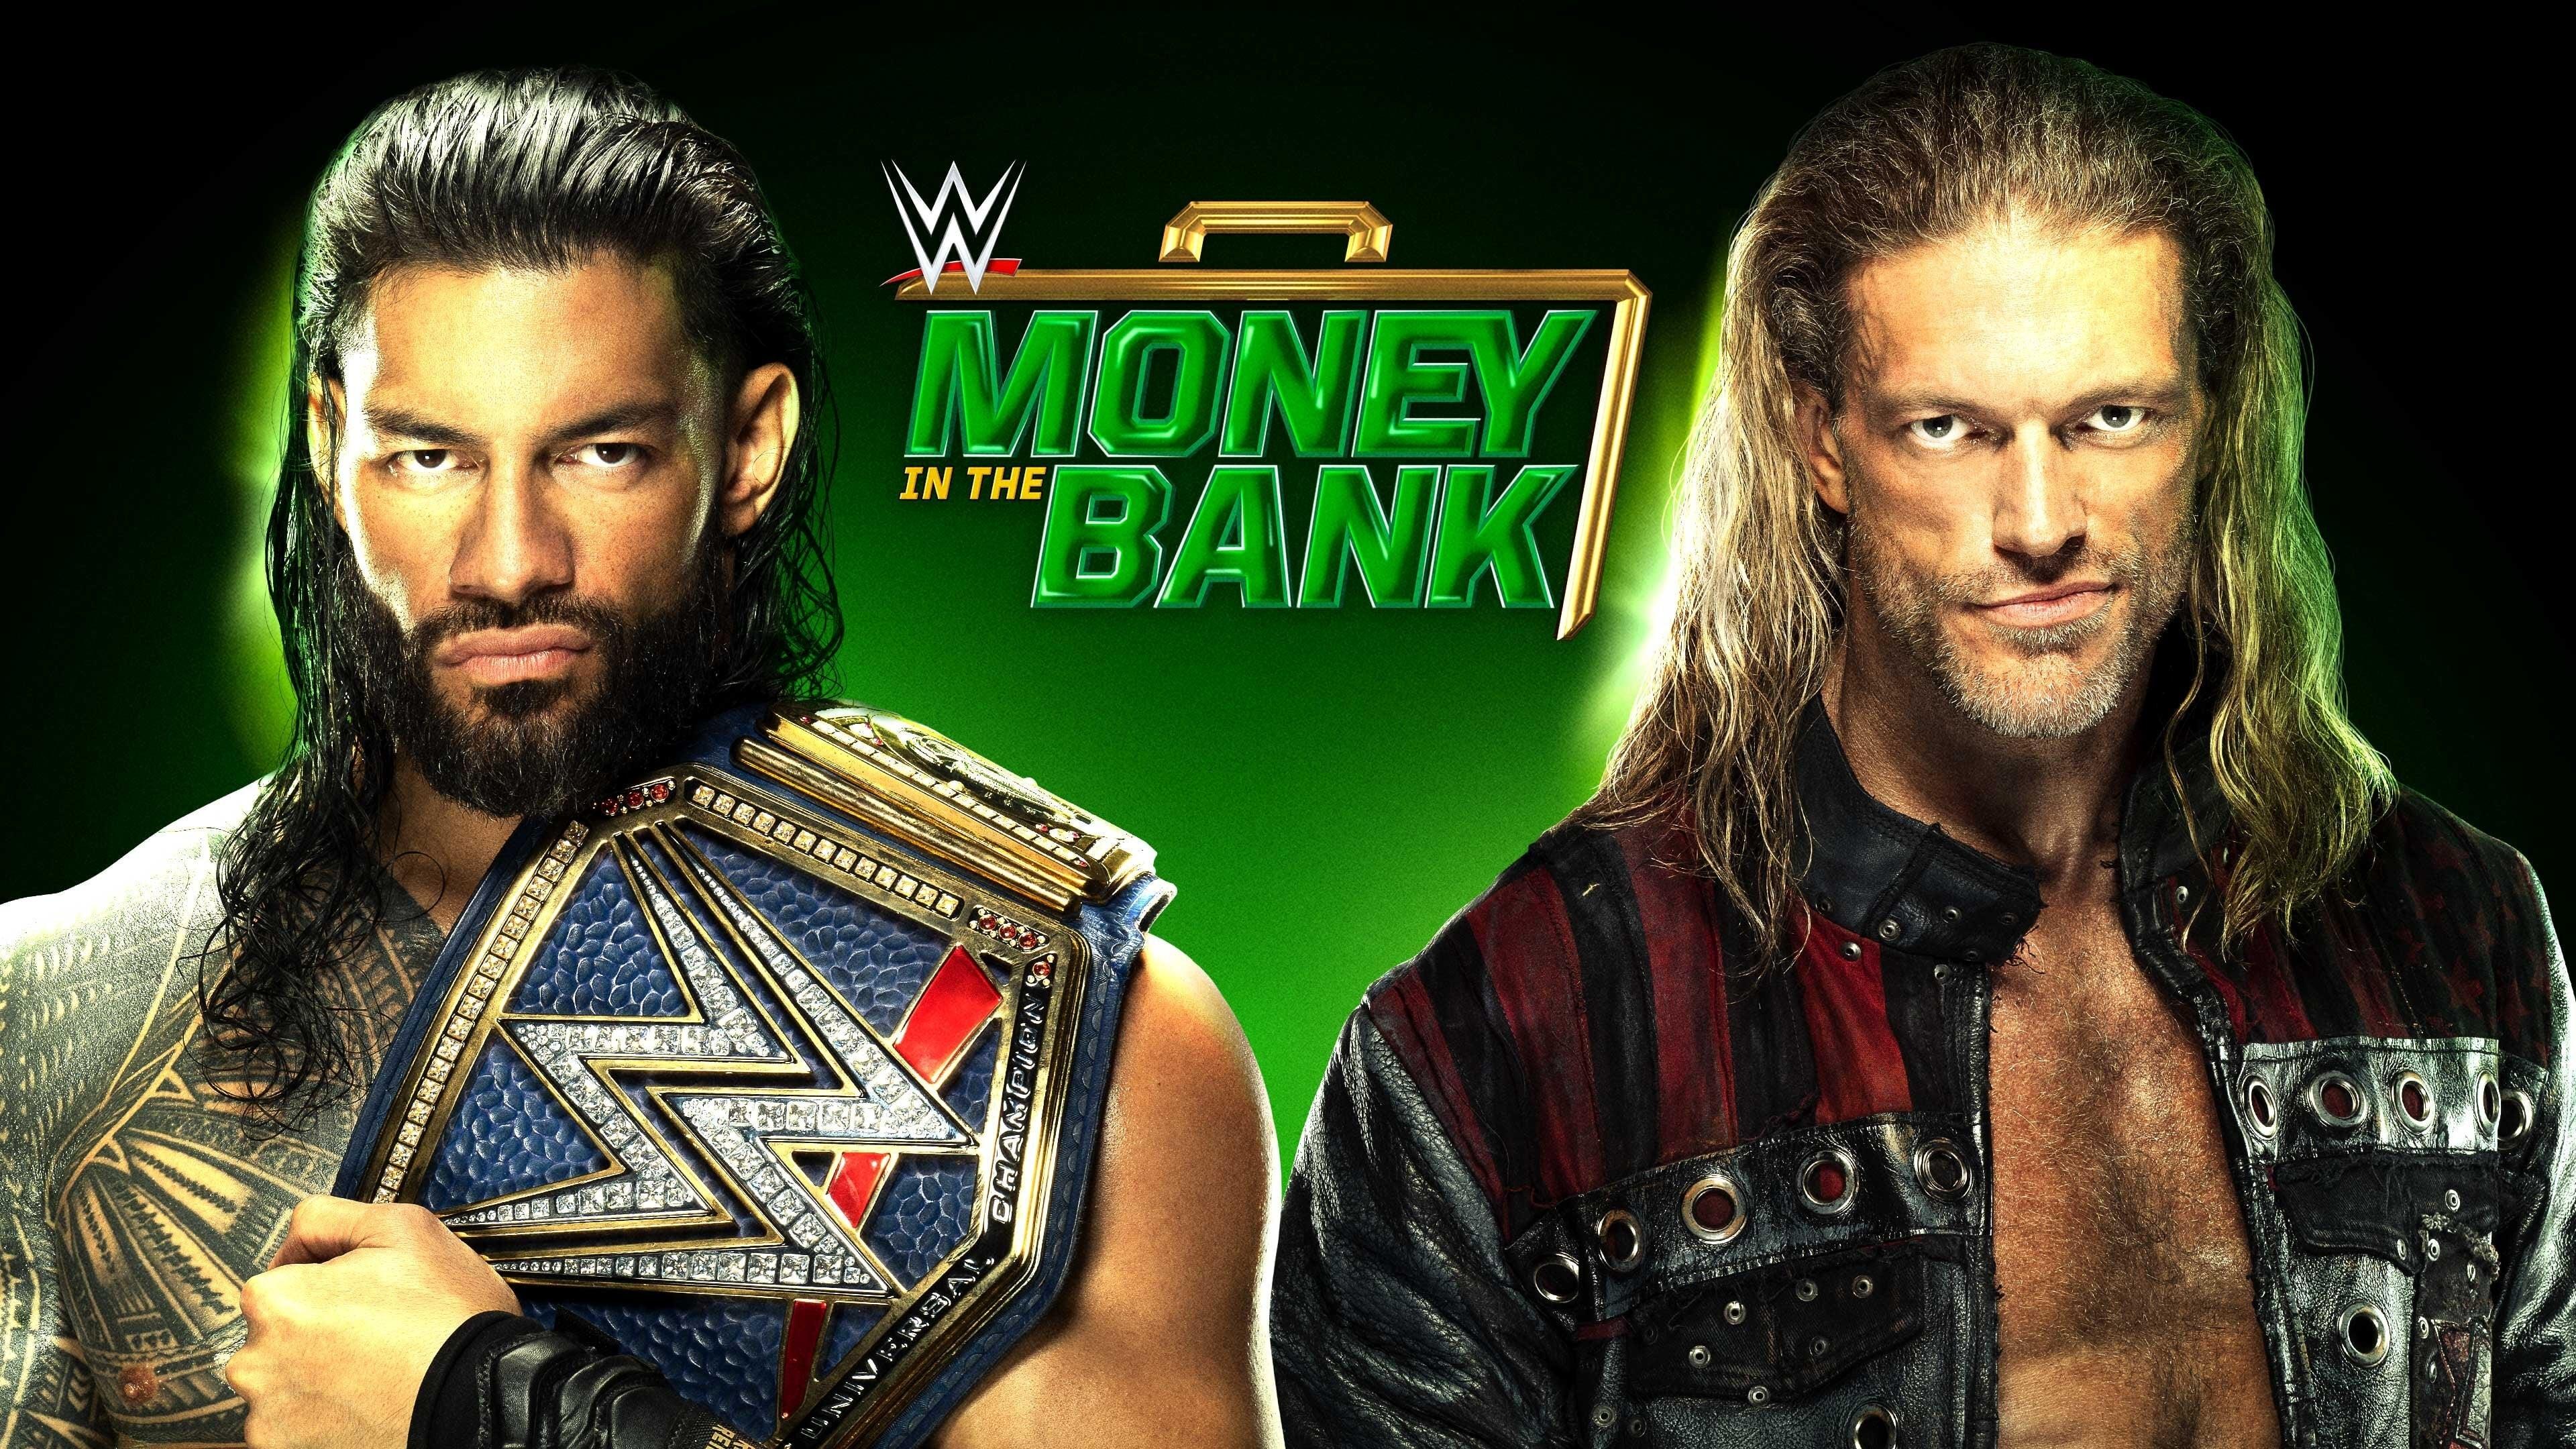 WWE Money in the Bank 2021 backdrop